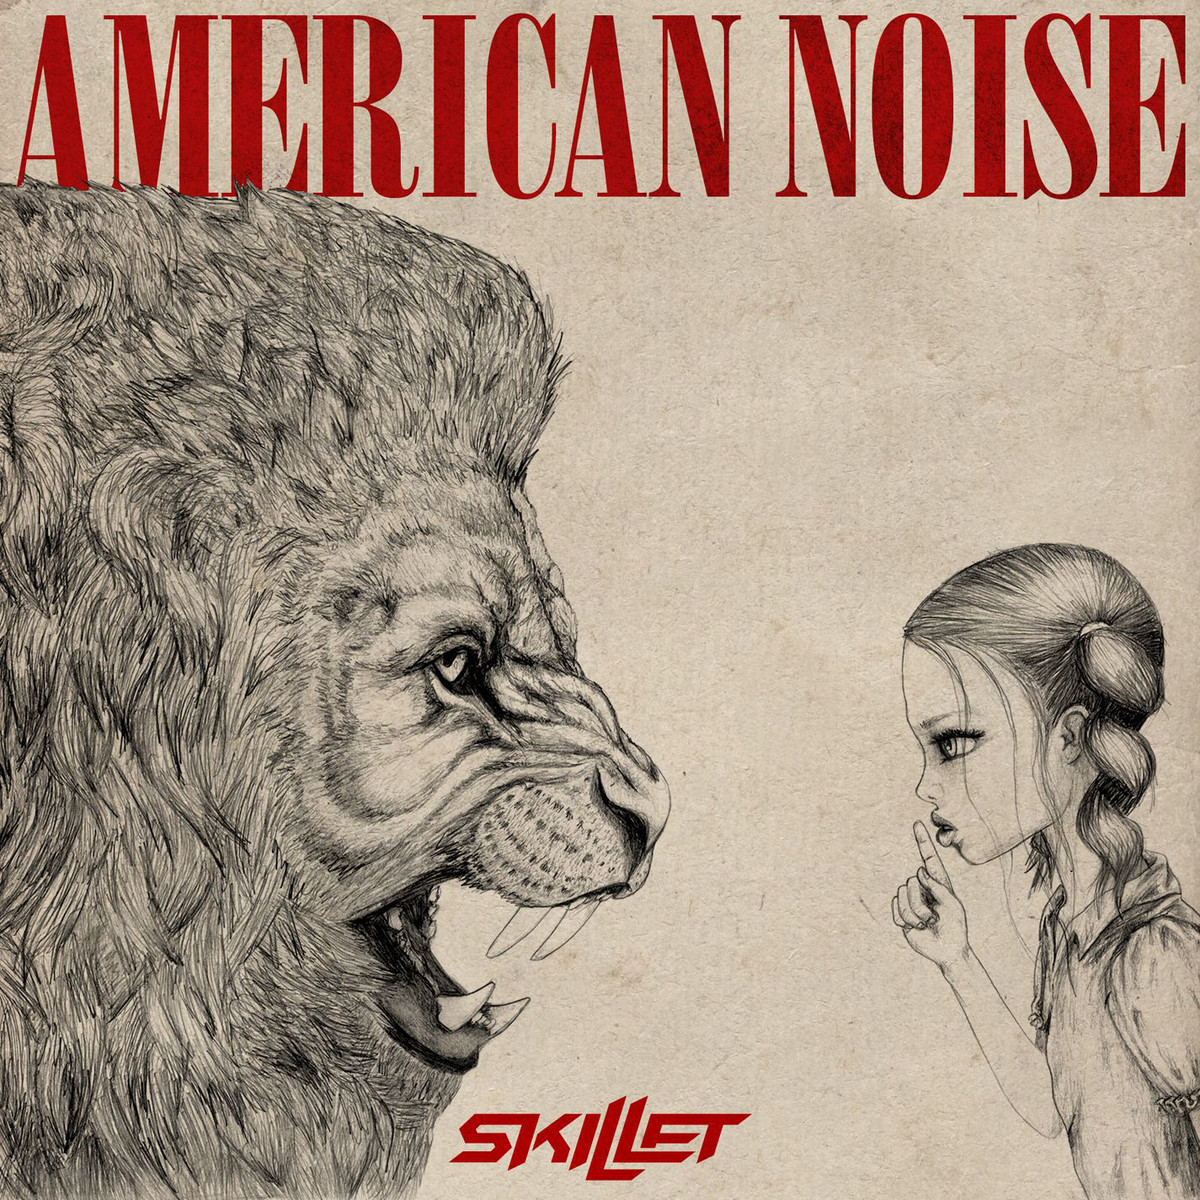 Ultimate Music Skillet American Noise Video Premiere